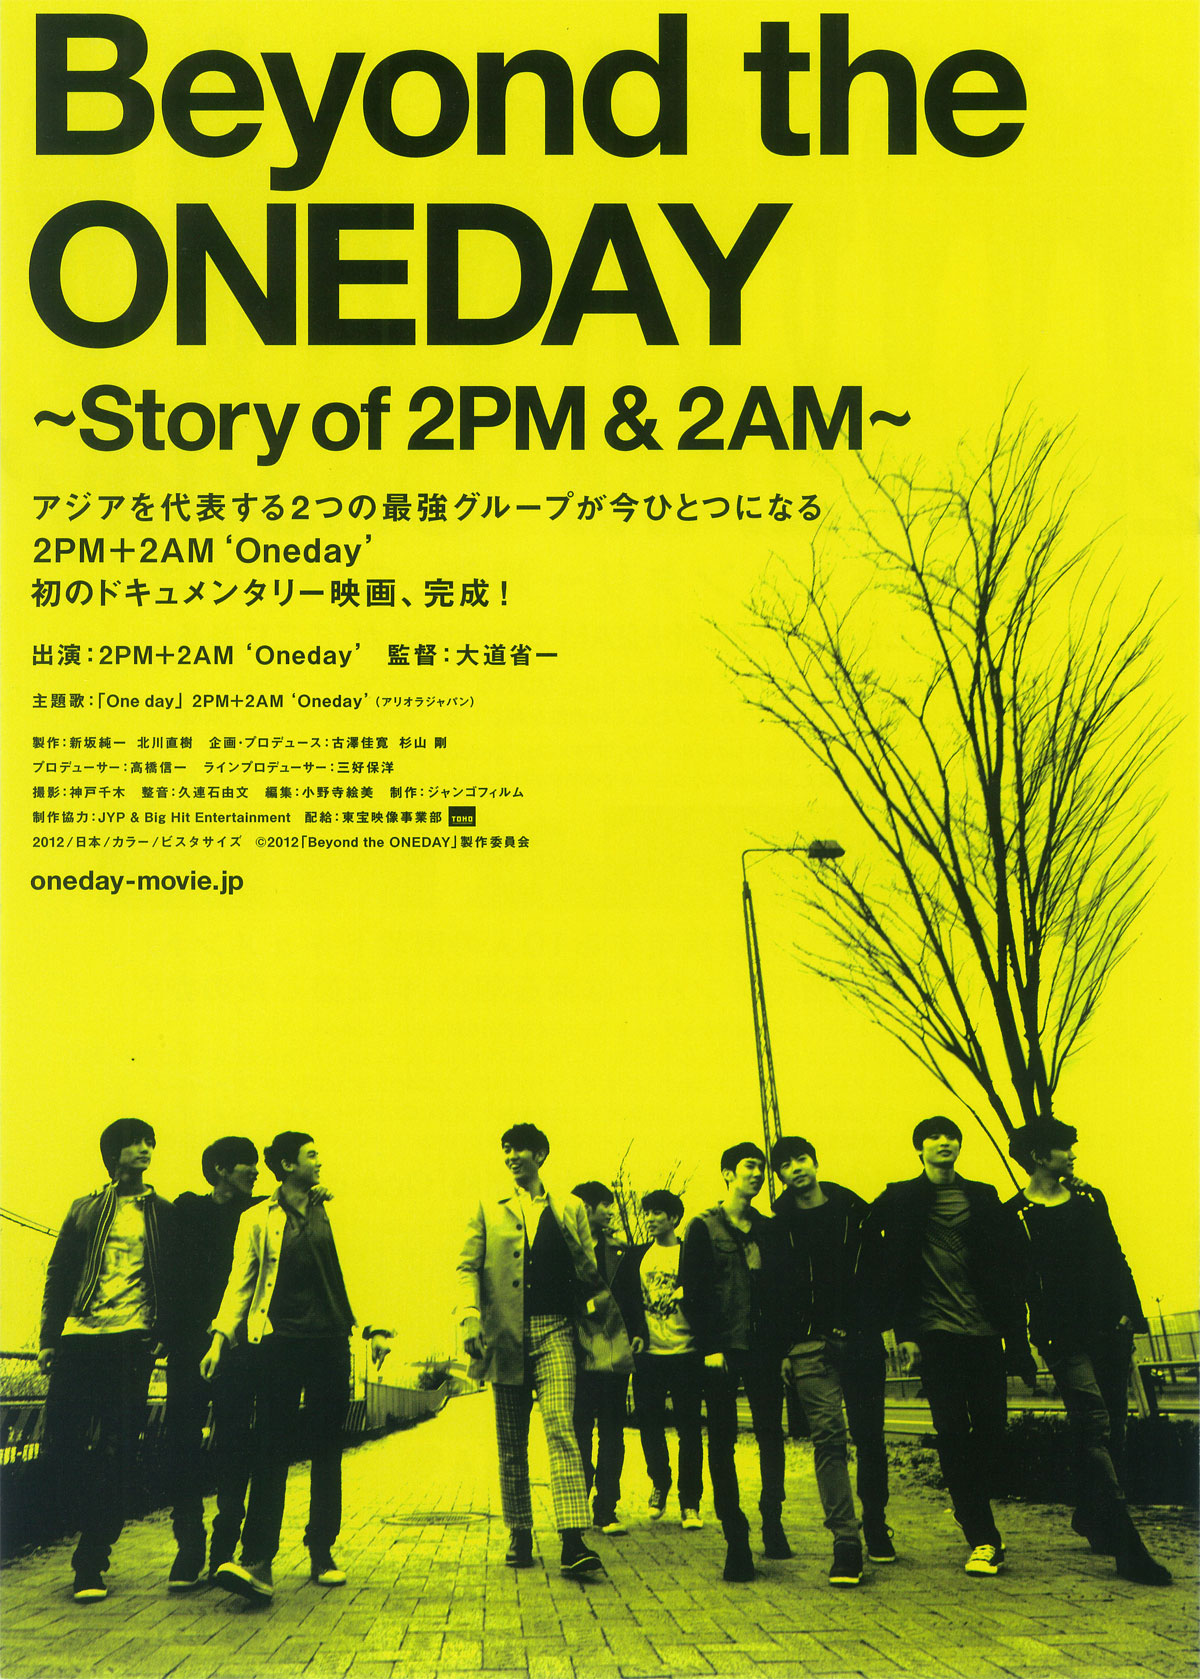 Beyond the ONEDAY ～Story of 2PM & 2AM～の画像